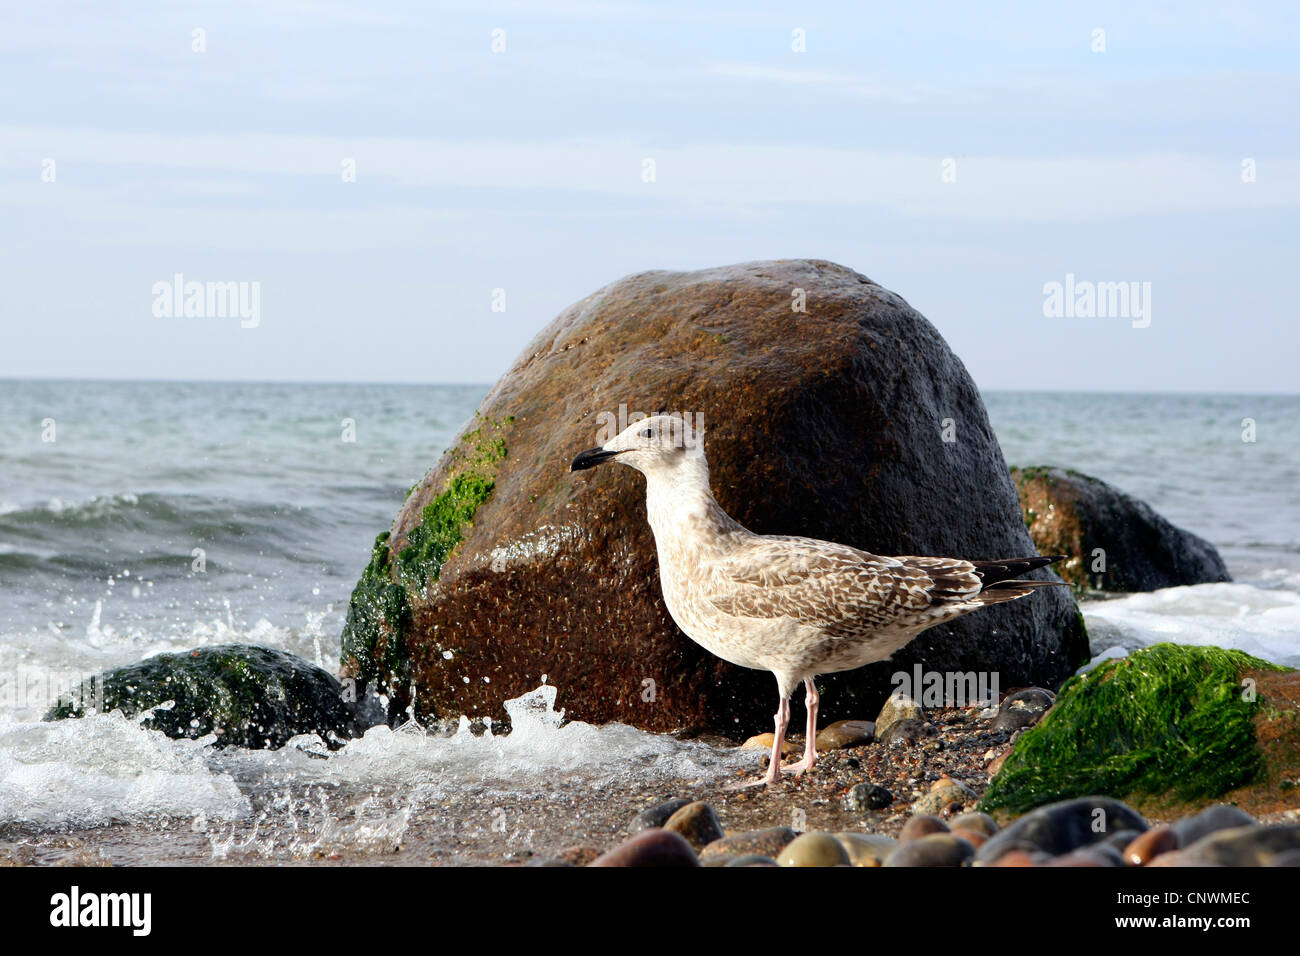 herring gull (Larus argentatus), standin at the beach sheltered from the surf by a rock, Germany, Mecklenburg-Western Pomerania, Baltic Sea Stock Photo